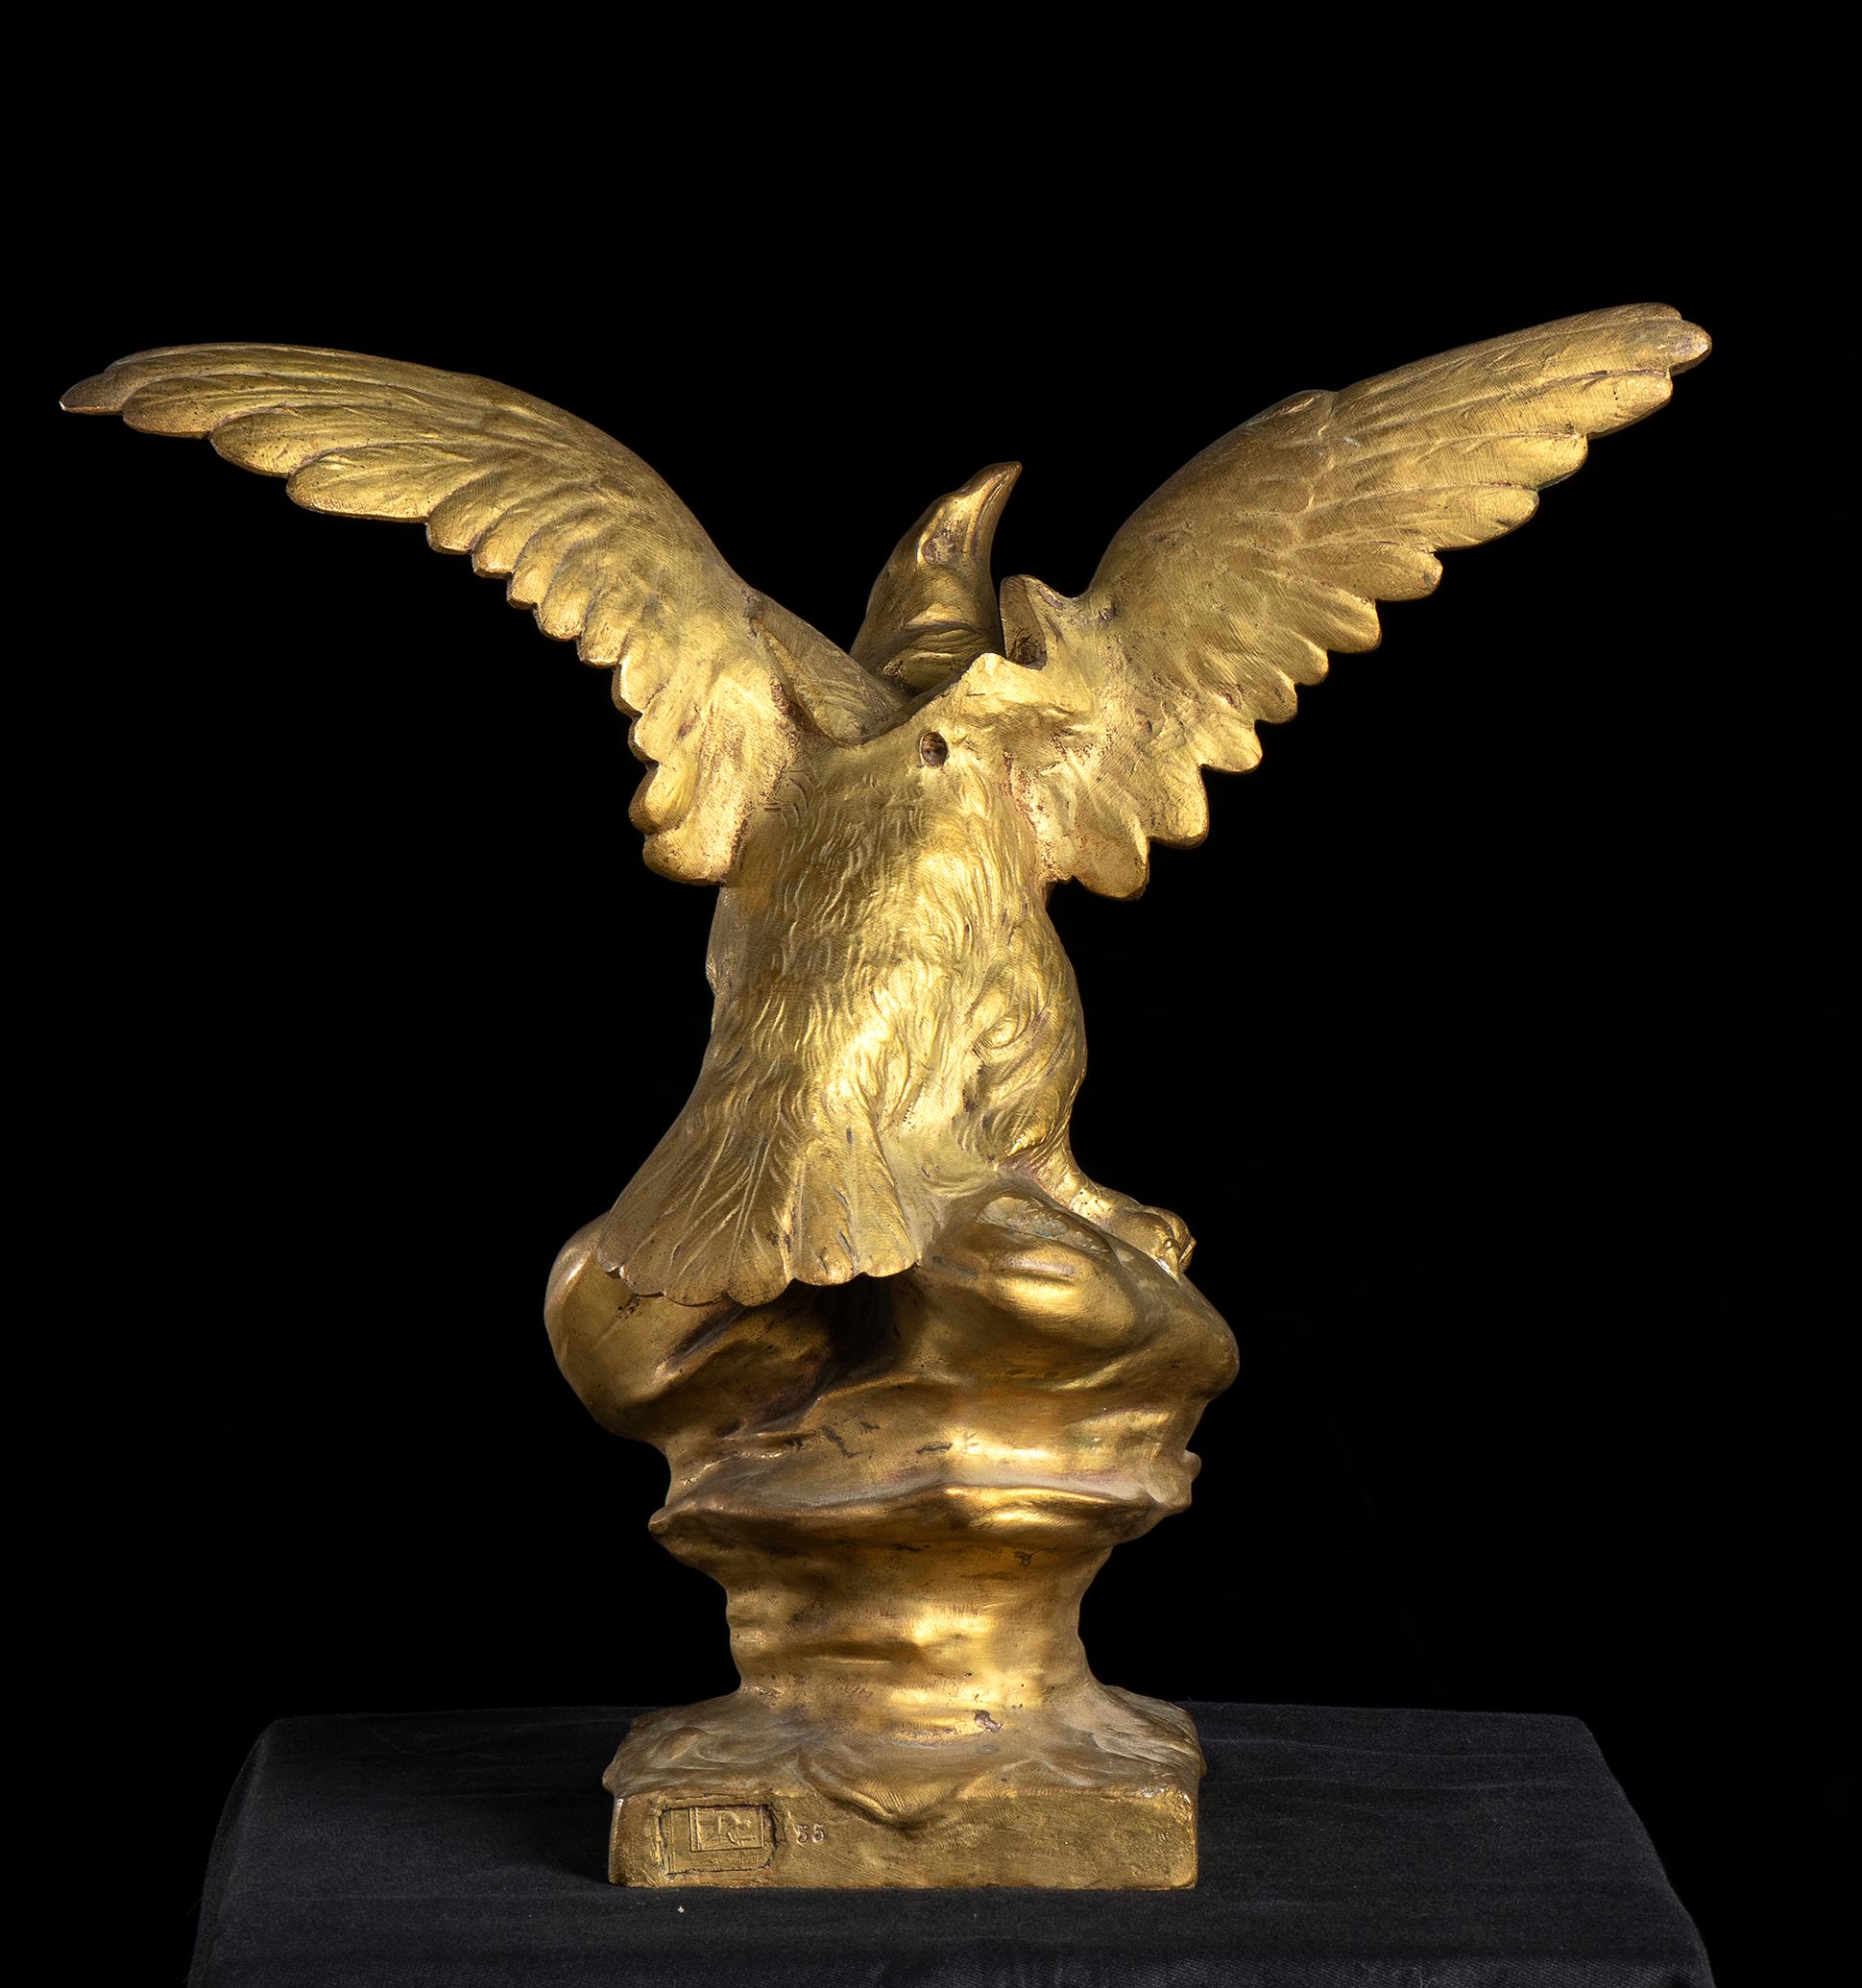 Henri Louis Levasseur (Paris, April 16, 1853 - 1934) was a French sculptor. Levasseur has been taught by August Dumont, Jules Thomas and Eugène Delaplanche. His work has been awarded several times, including in the Salon des Artistes Français and at